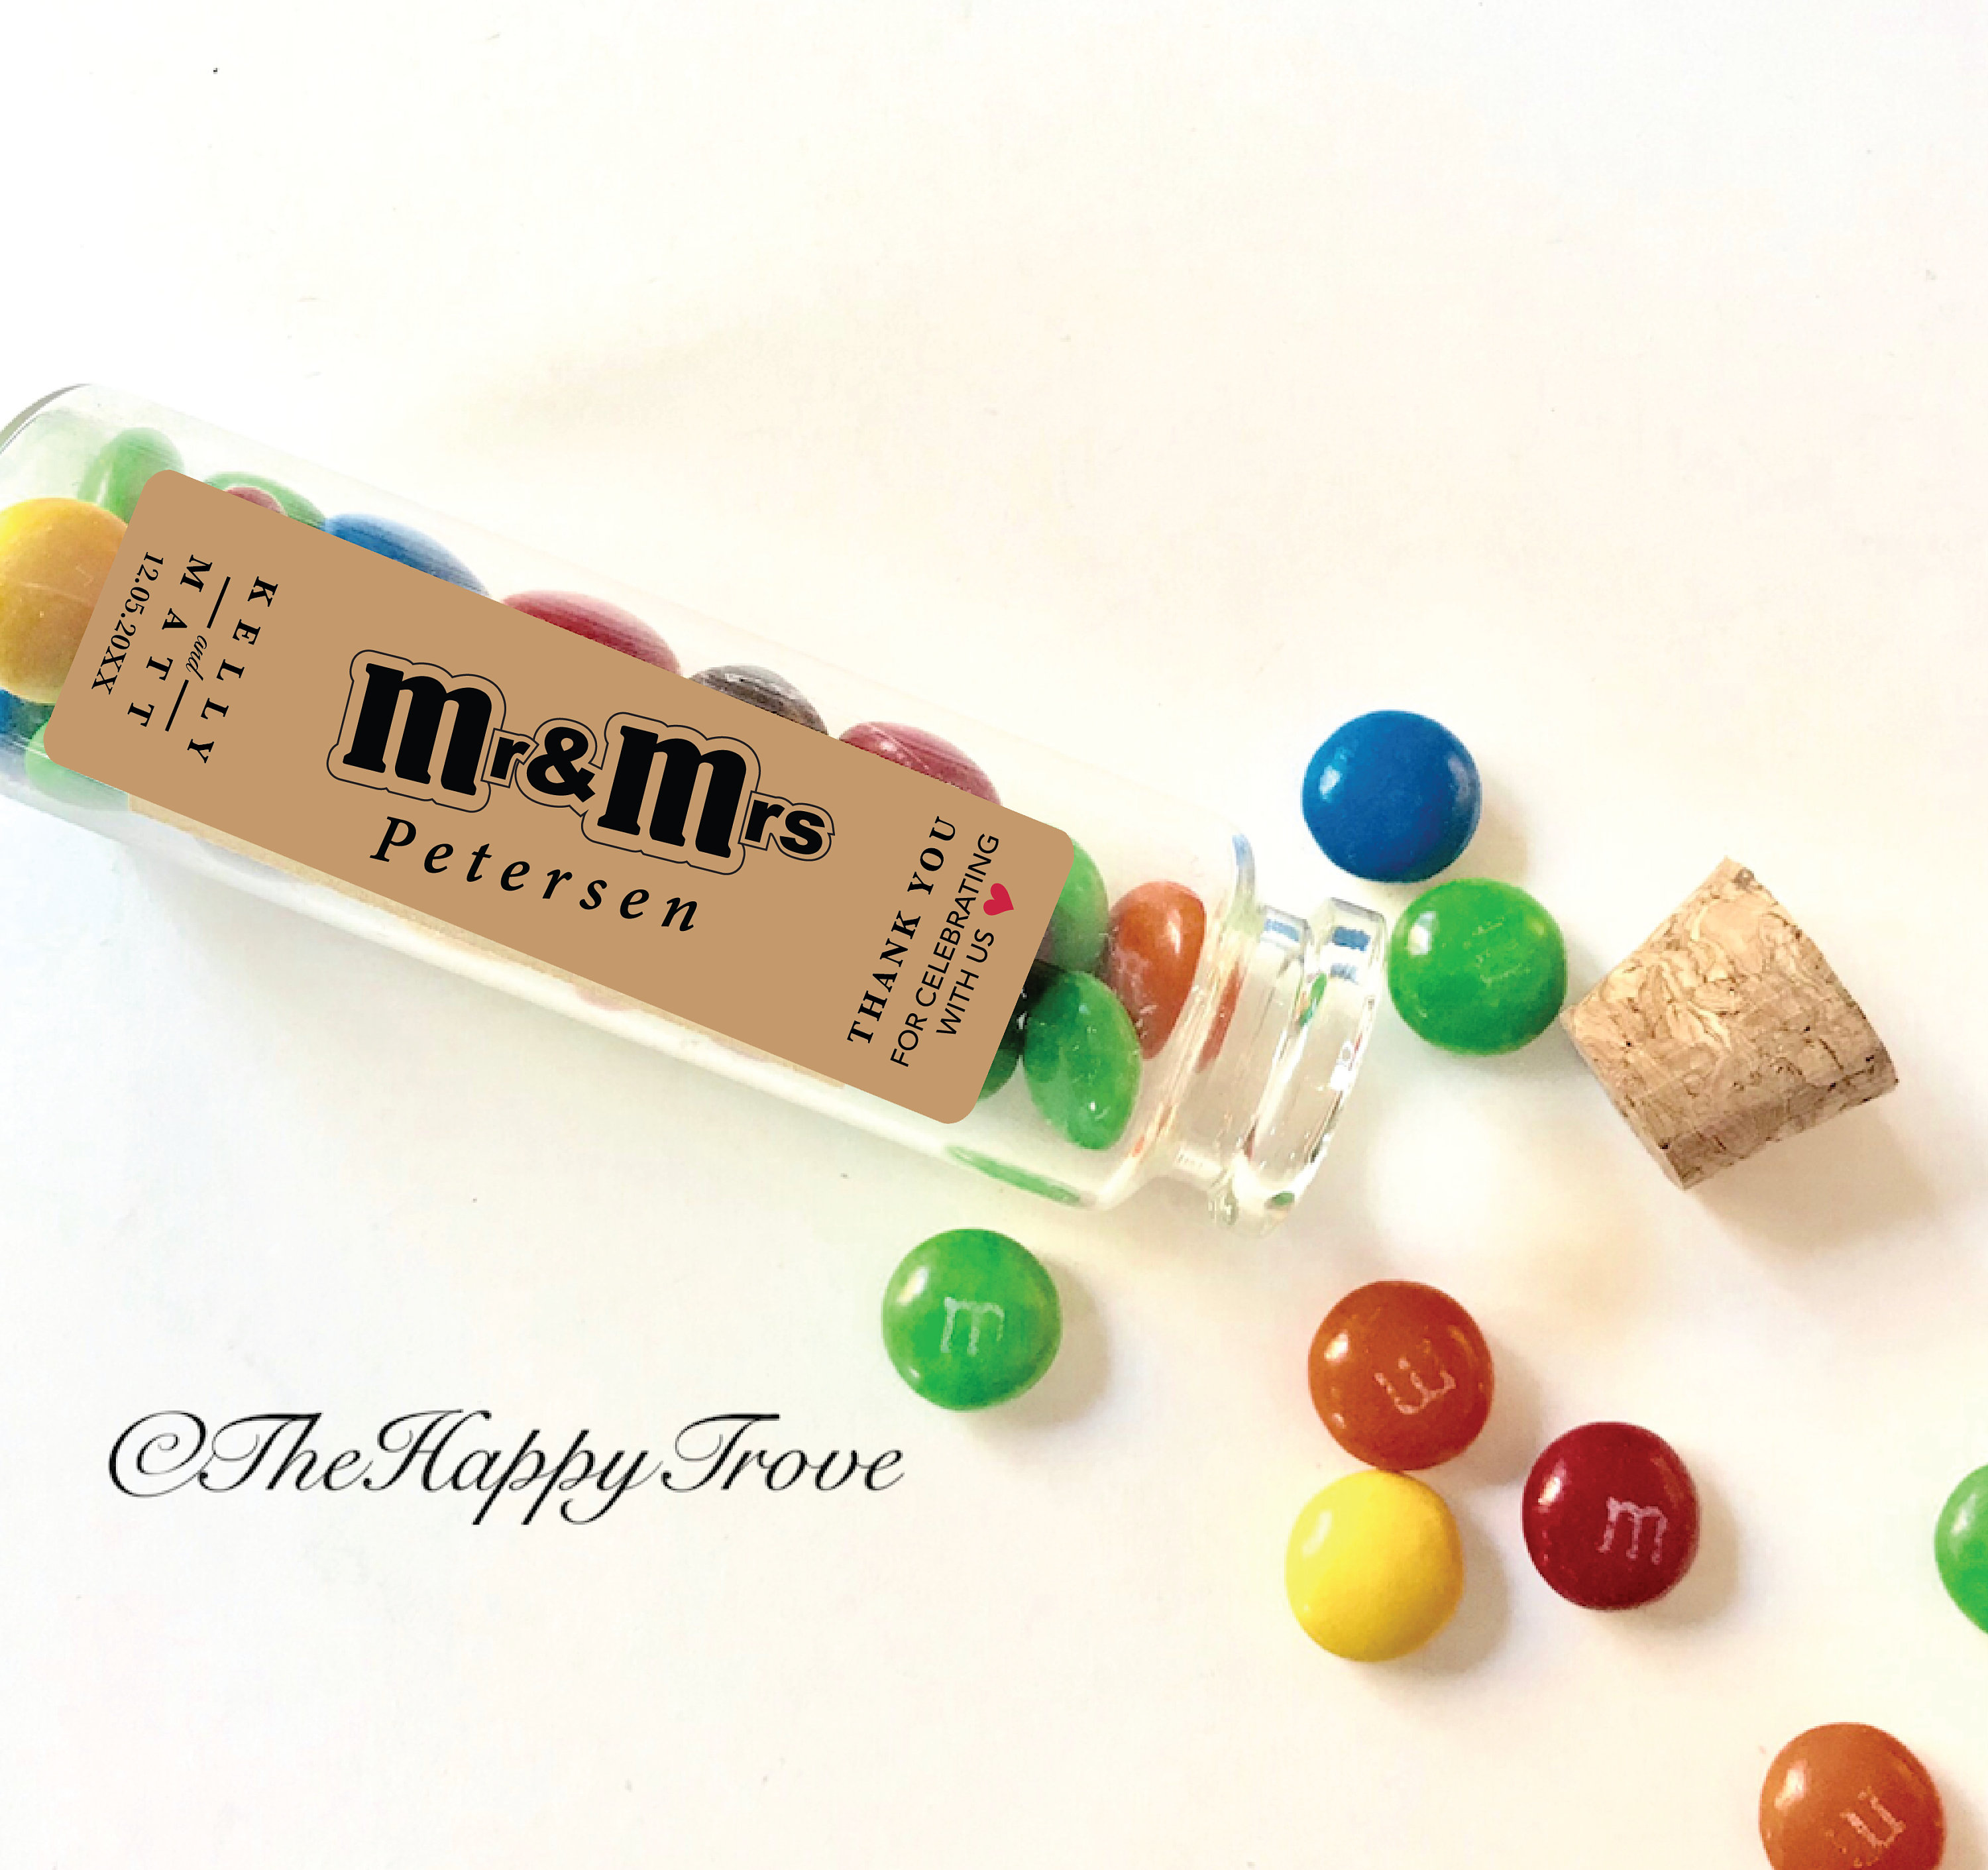 I'm using M&M's as my wedding favor. What size organza bag do I